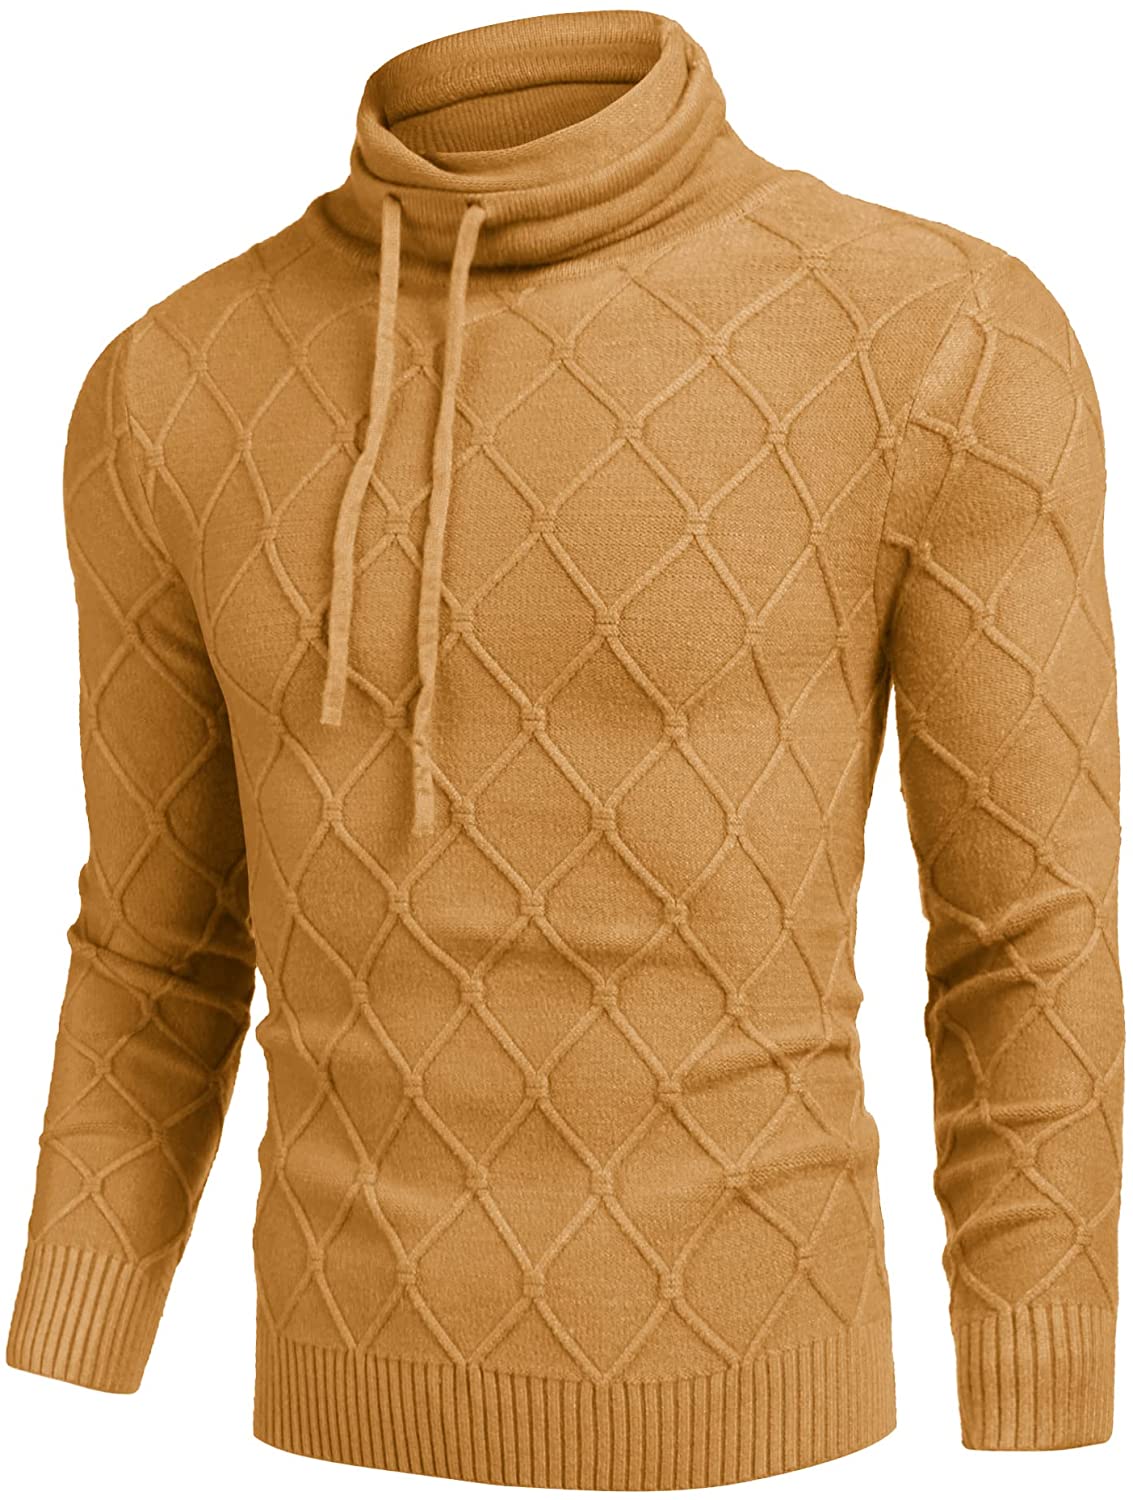 COOFANDY Men's Knitted Turtleneck Sweater Casual Thermal Long Sleeve Pullover 